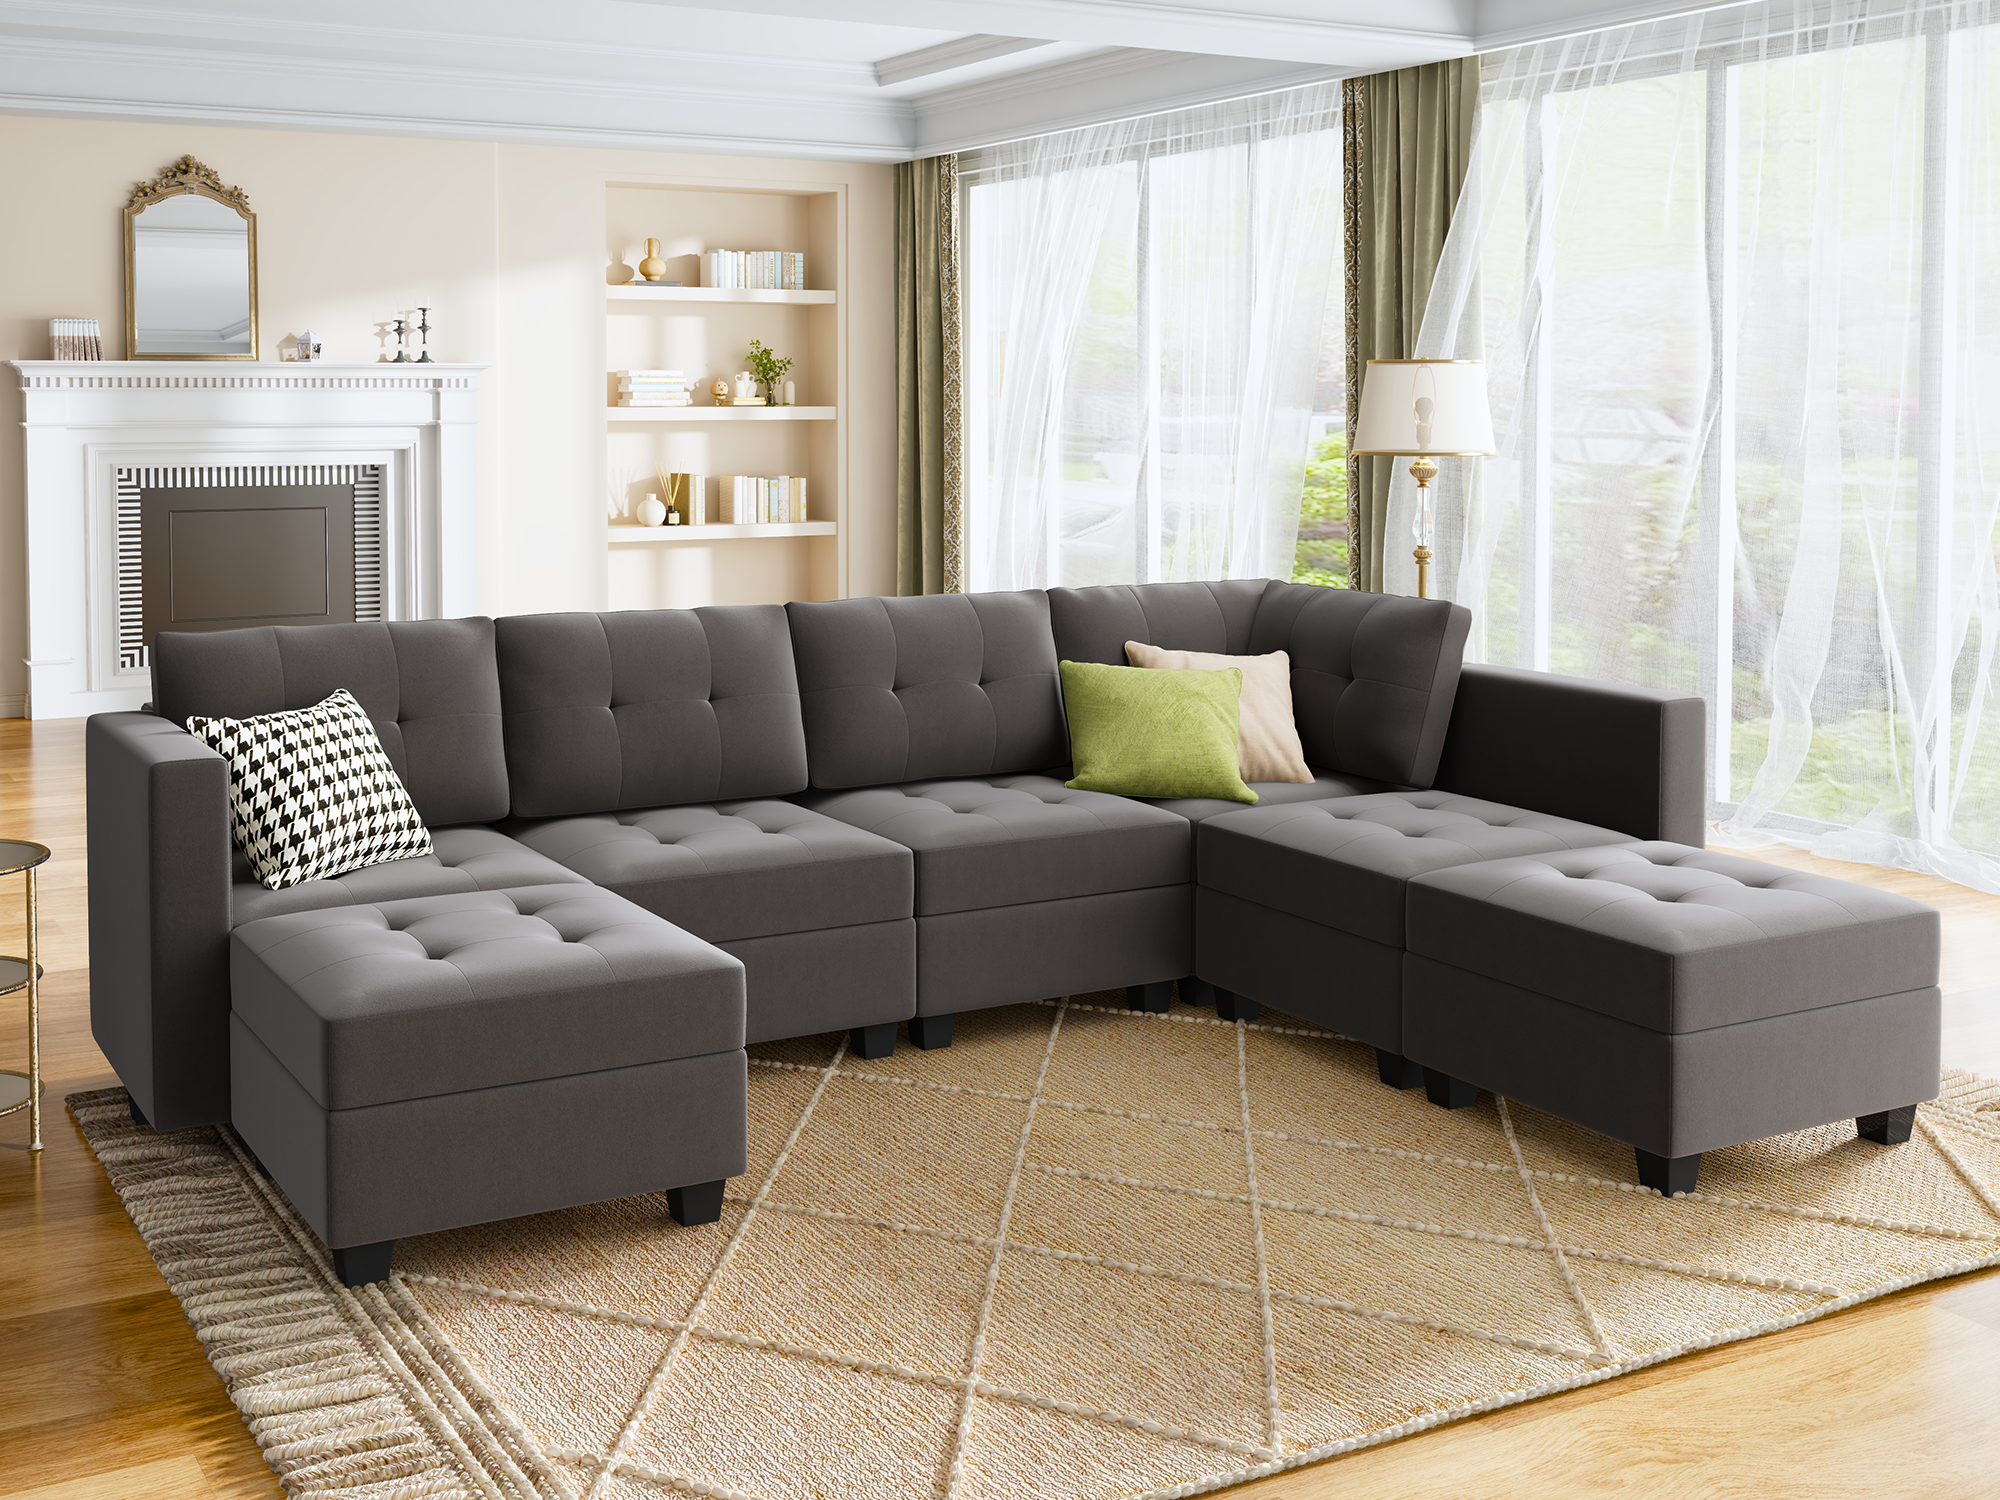 HONBAY 7-Piece Velvet Modular Sectional With Storage Seat